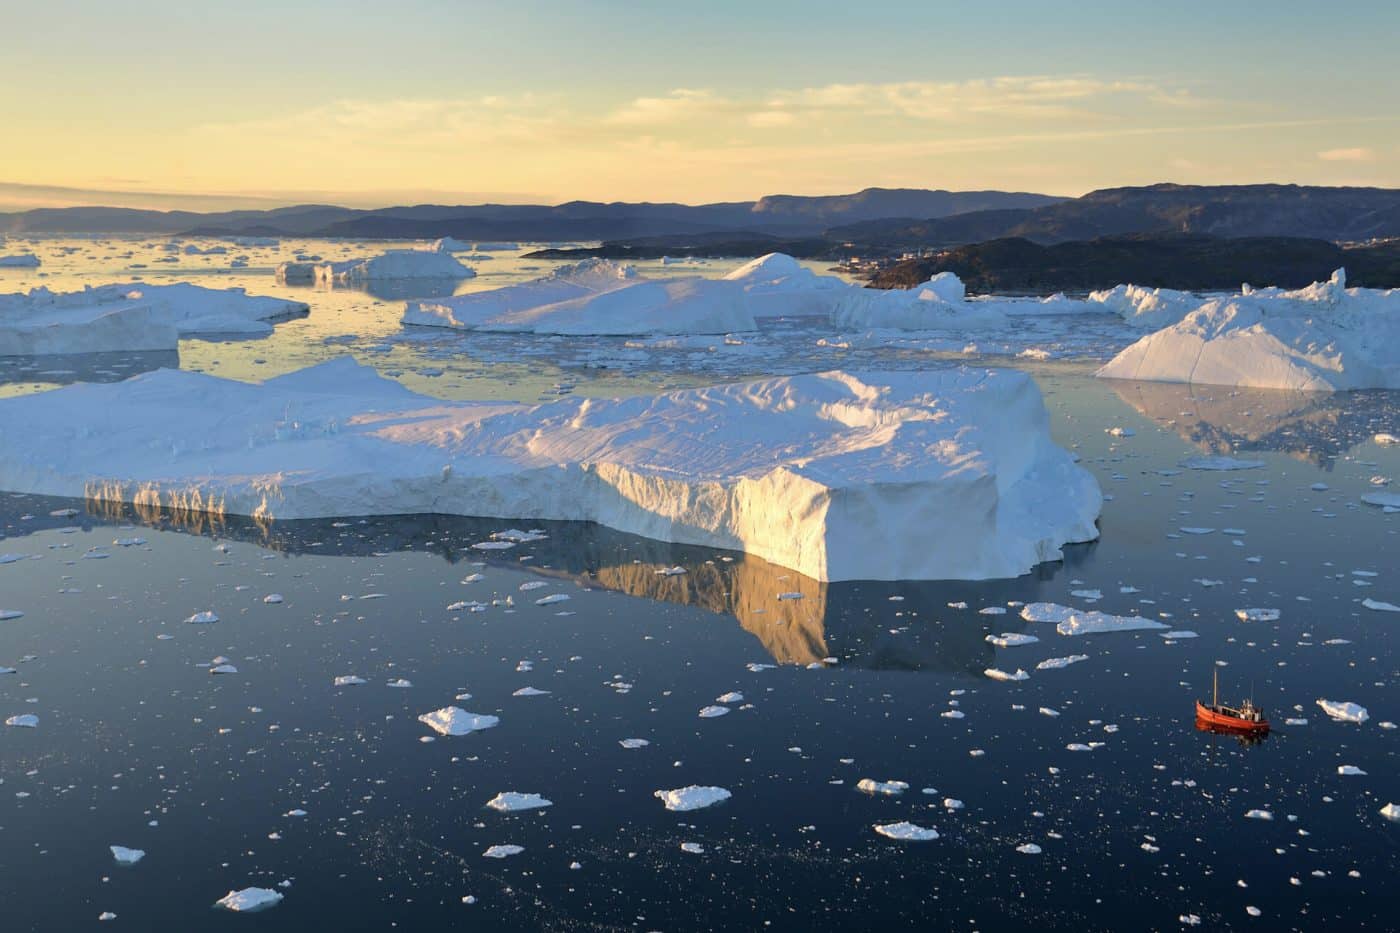 Ilulissat Icefjord from the air. Photo by Rino Rasmussen